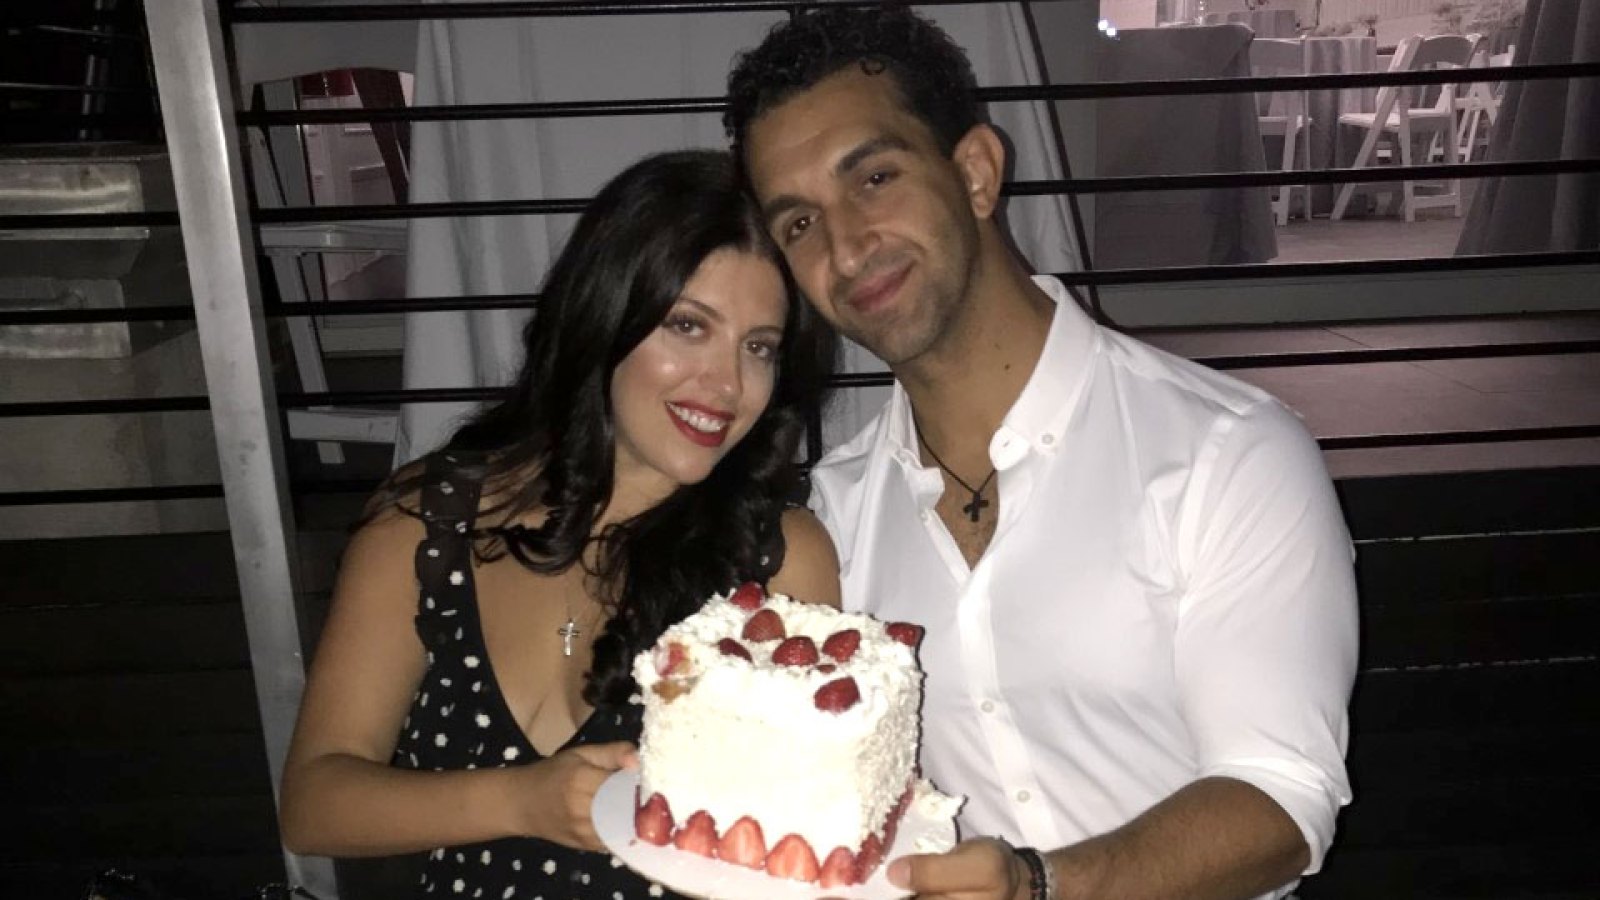 Kathy, Rich Wakile's Daughter Victoria Is Engaged to Teddy Kosmidis